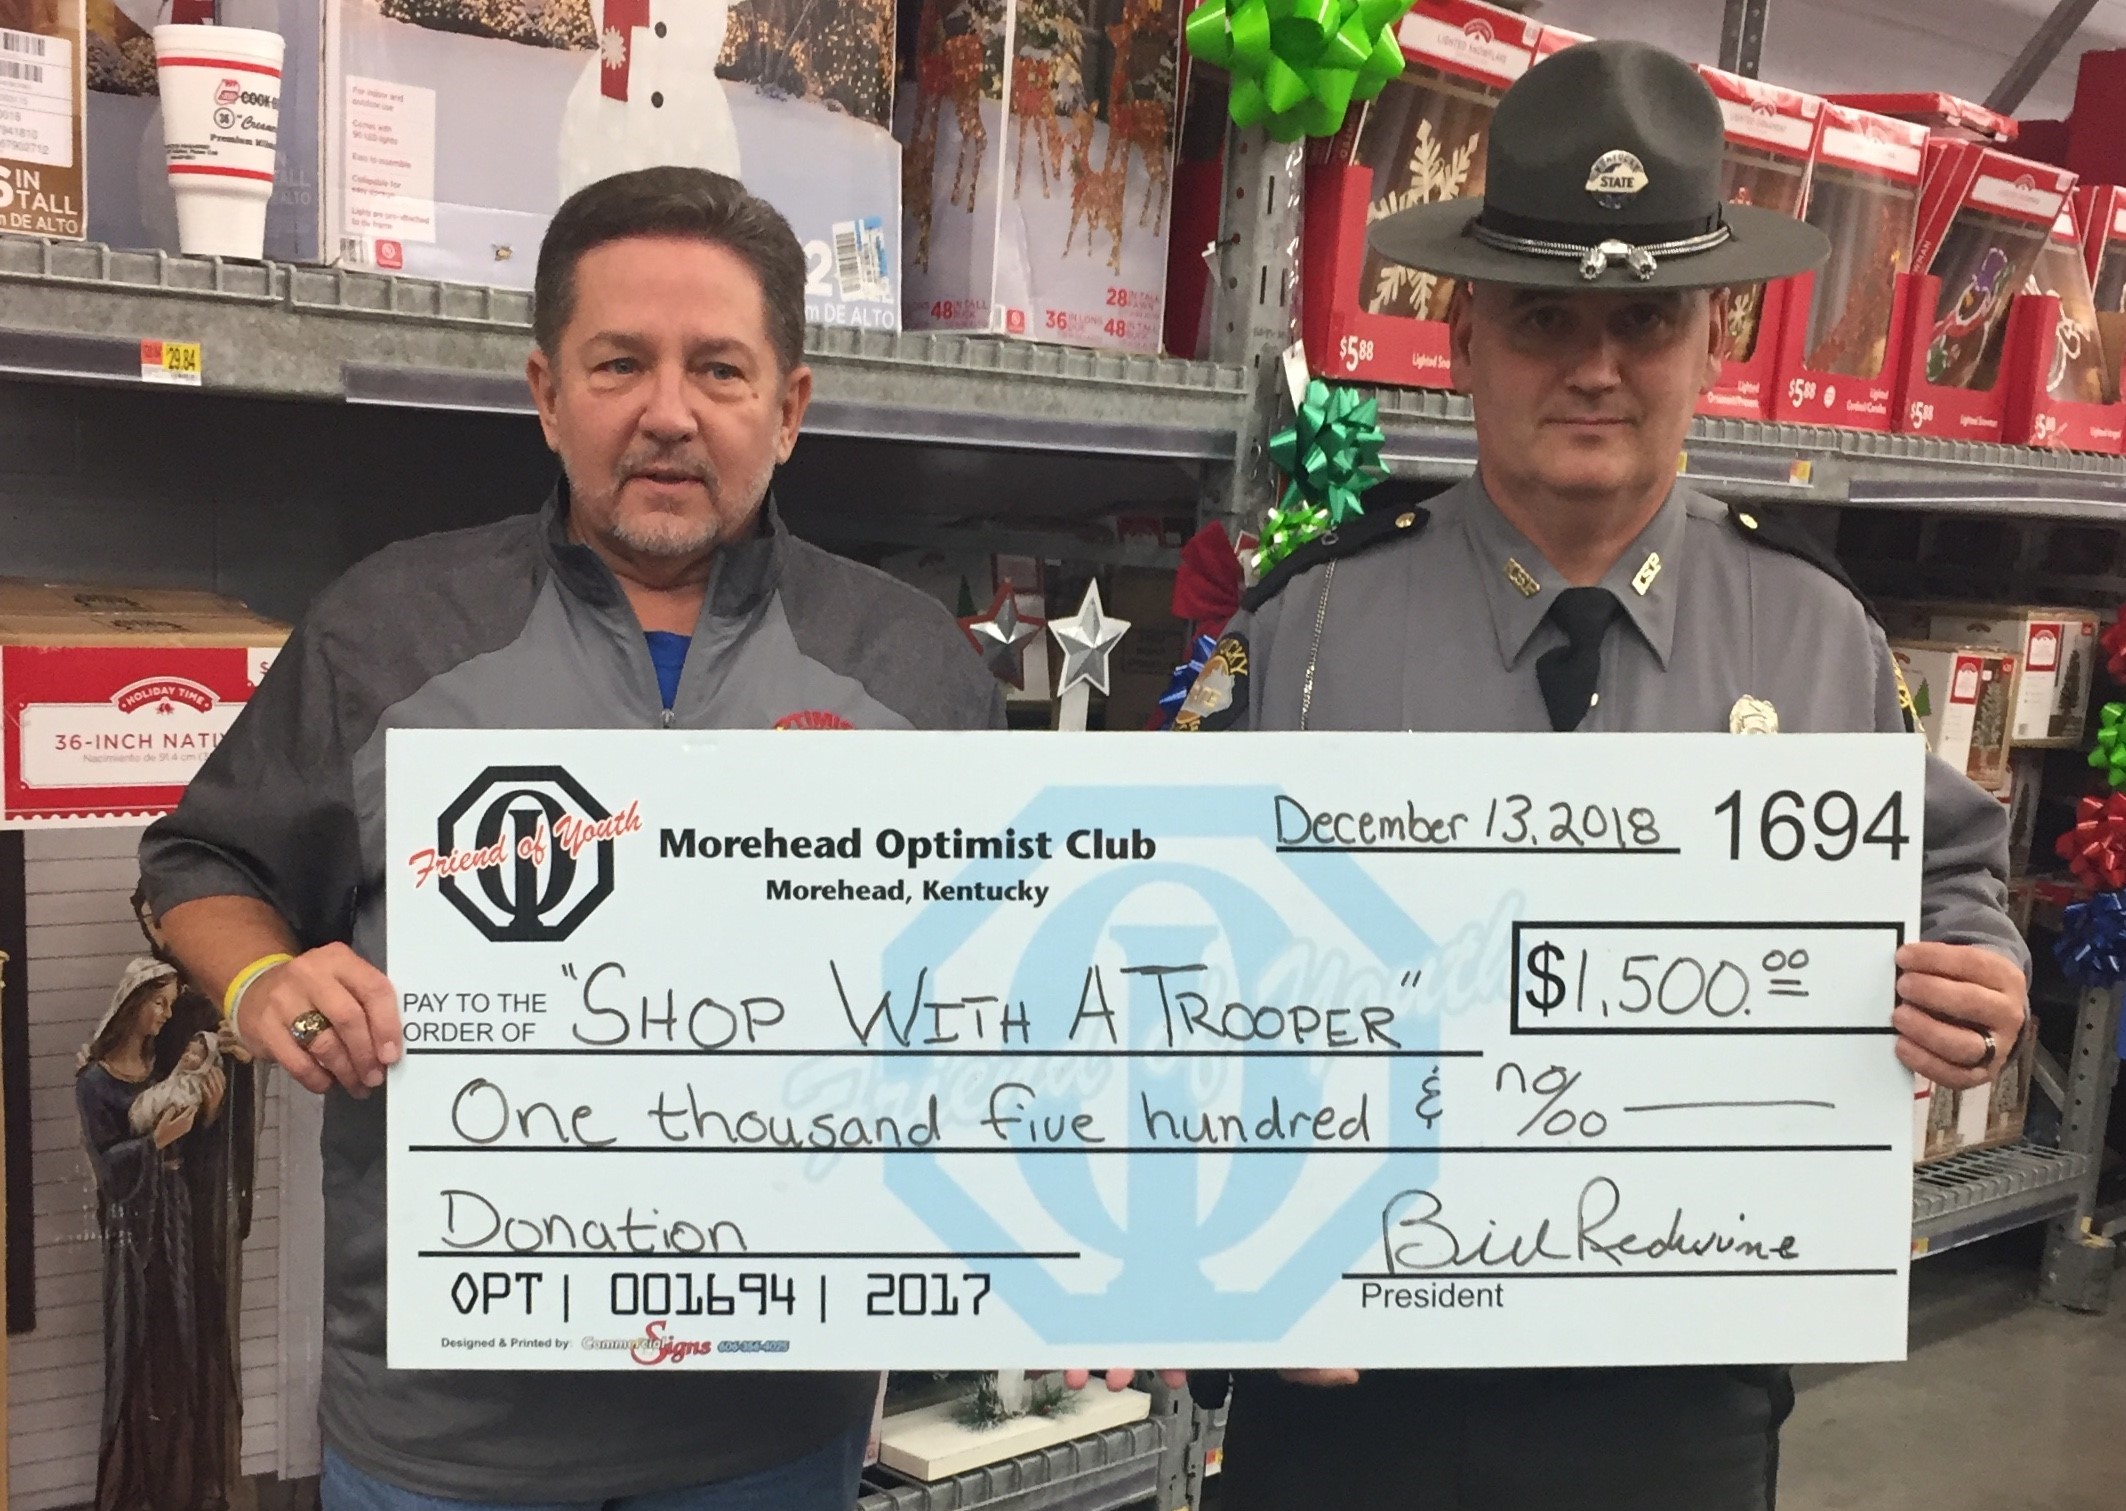 Presentation of check for "Shop With a Trooper"